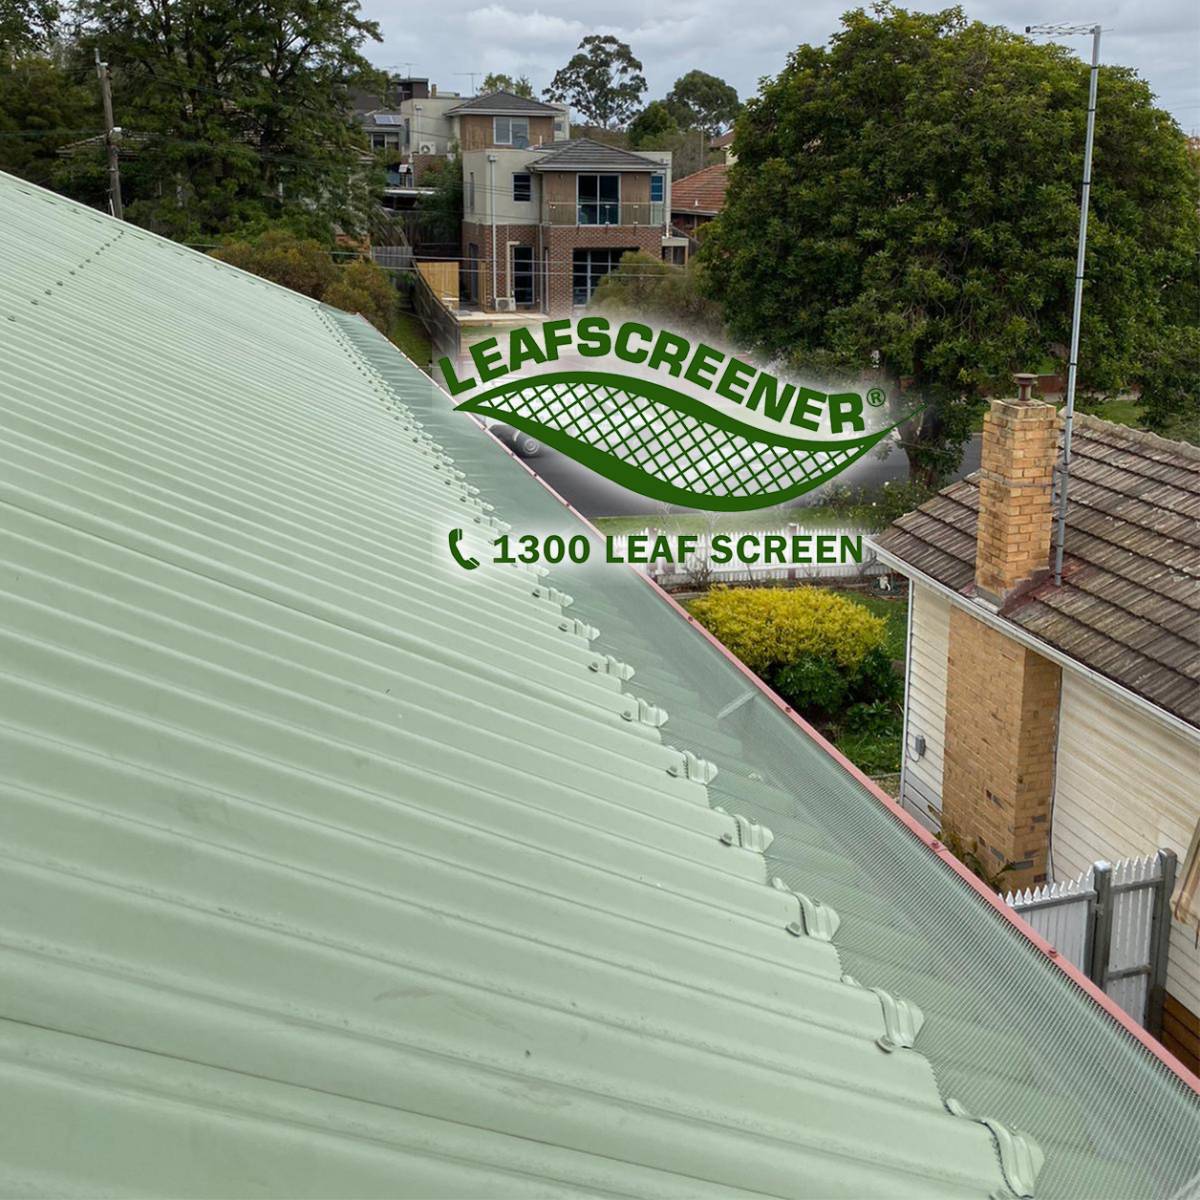 View Photo: Corrugated roof protected by LEAFSCREENER®